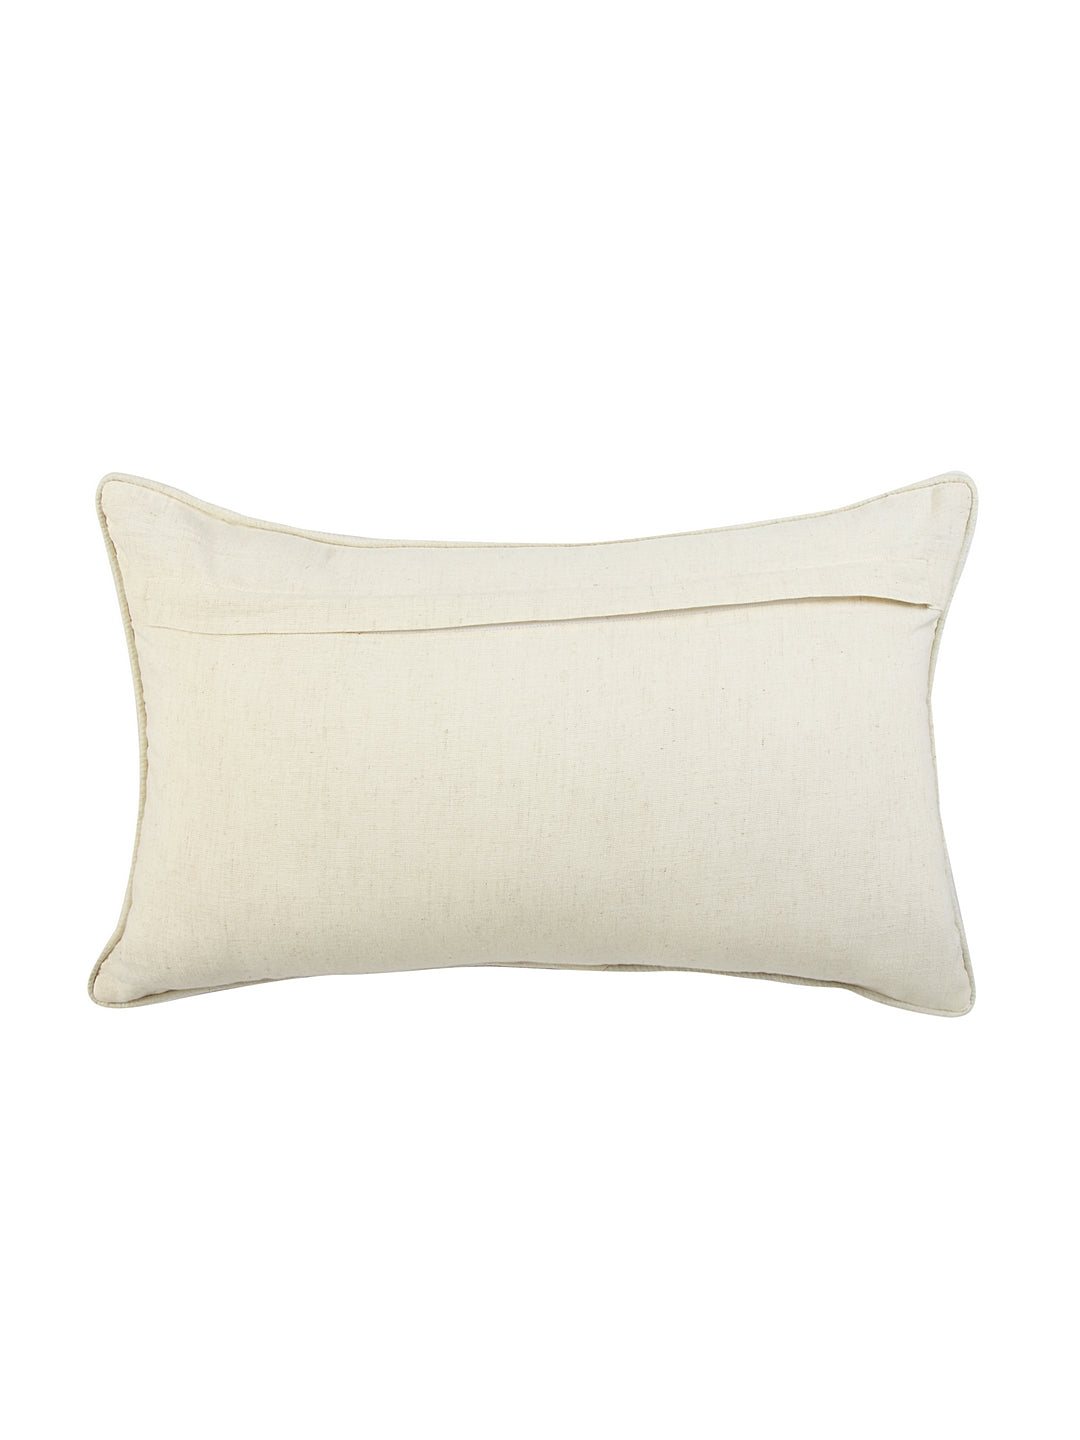 Arabesque Cushion Cover with Filler 30x50cm